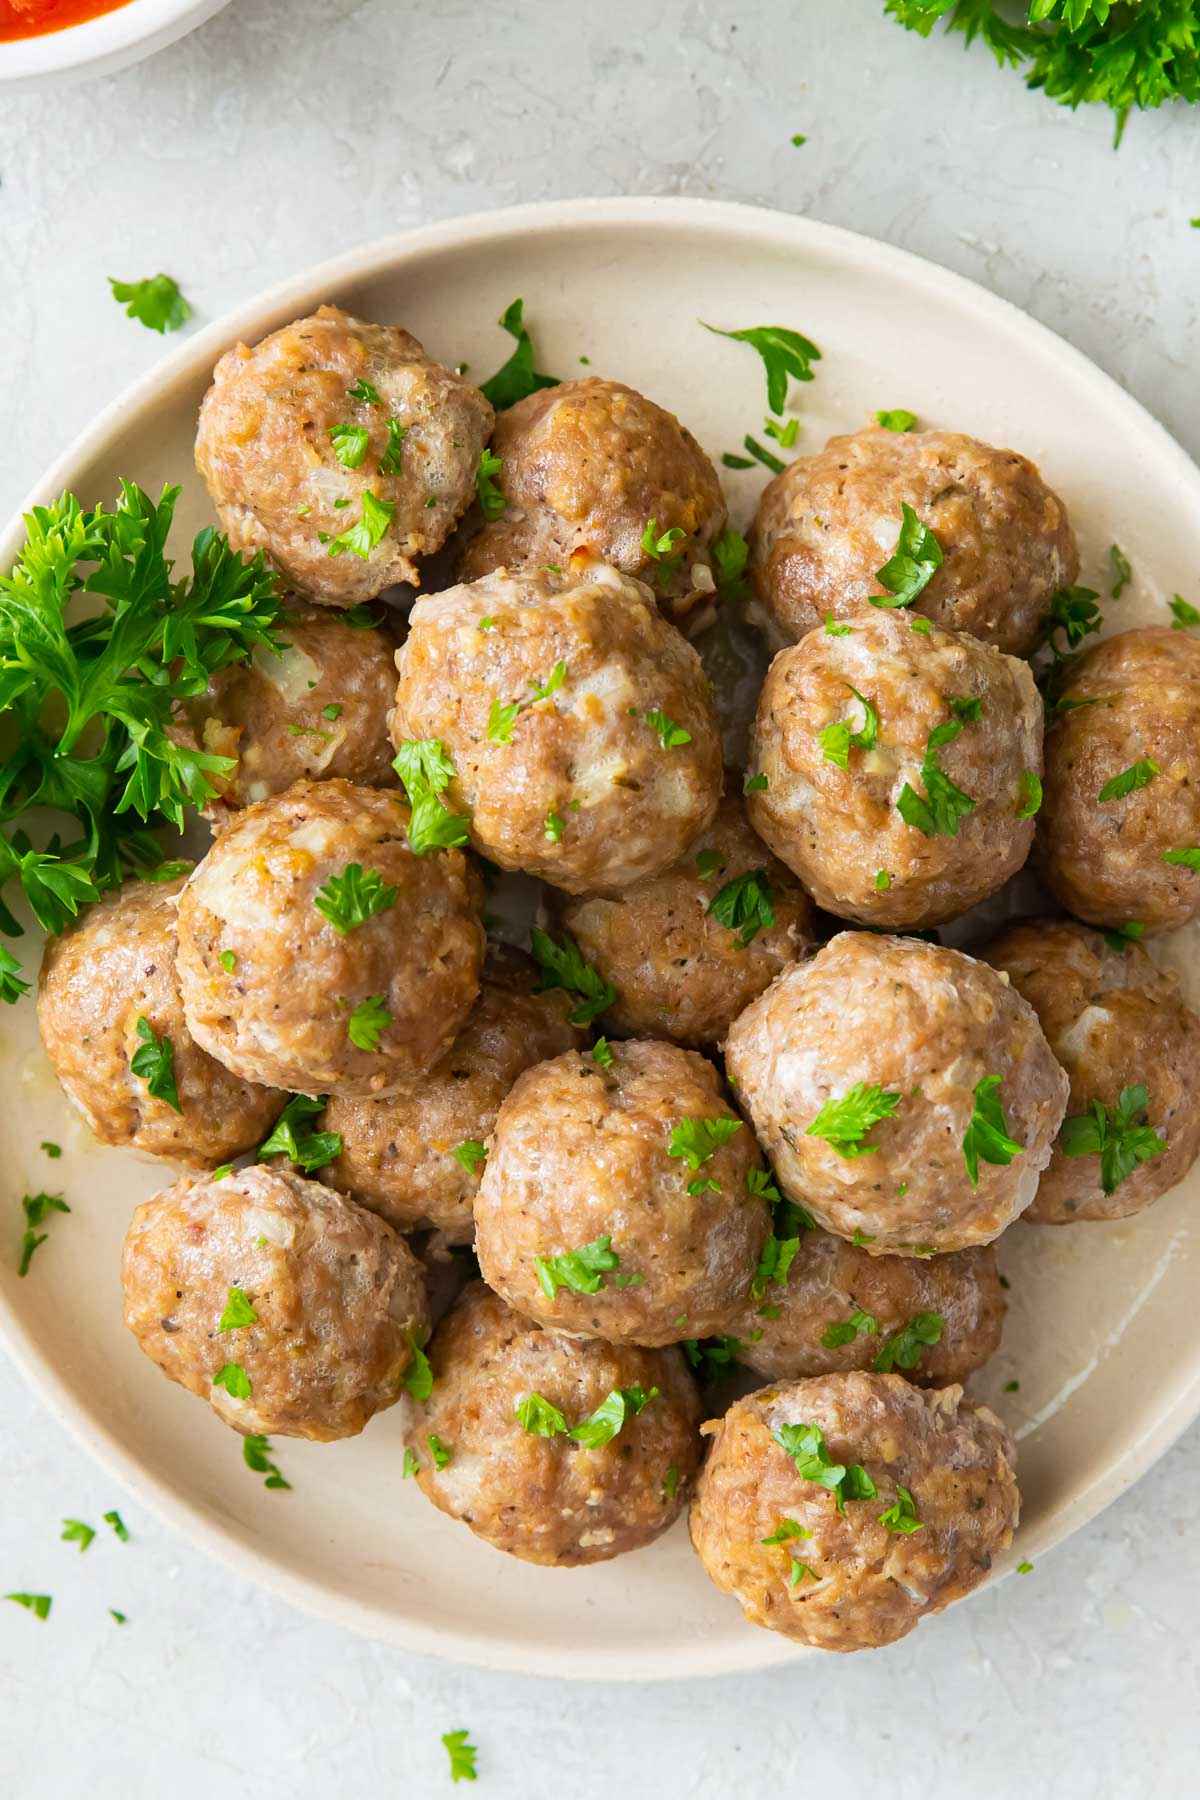 Baked turkey meatballs on a plate with parsley garnish.